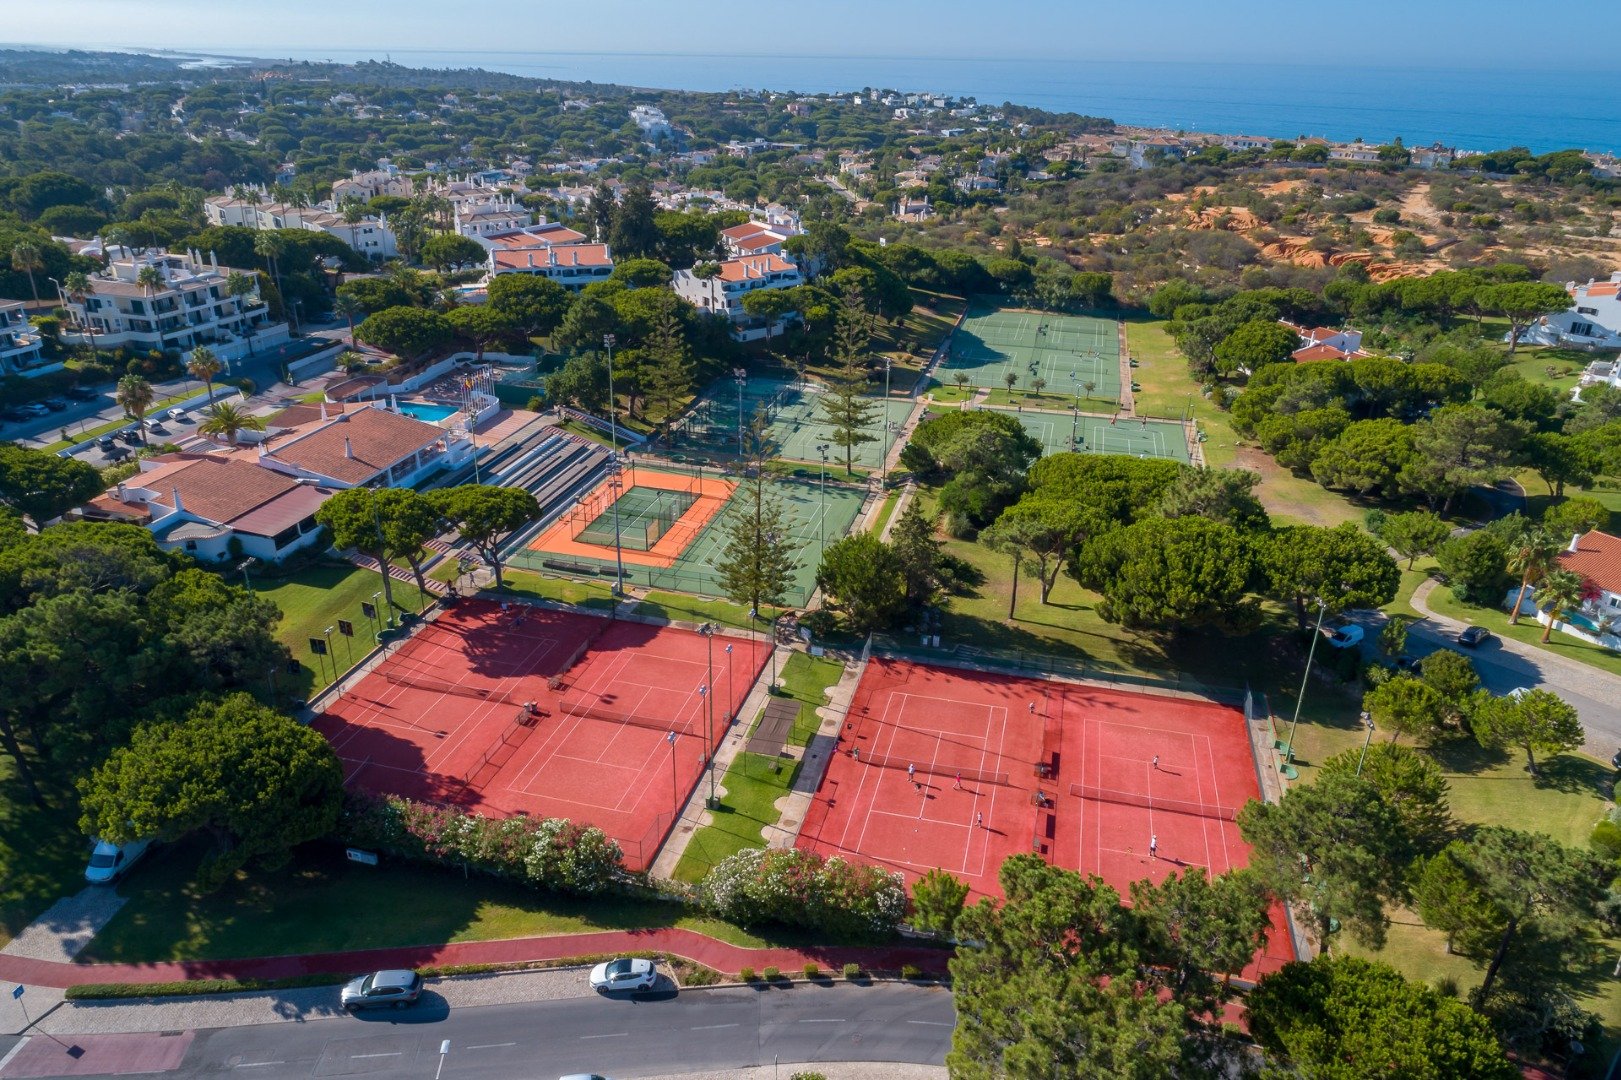 First international tennis tournament of the year in Portugal is in Vale do Lobo